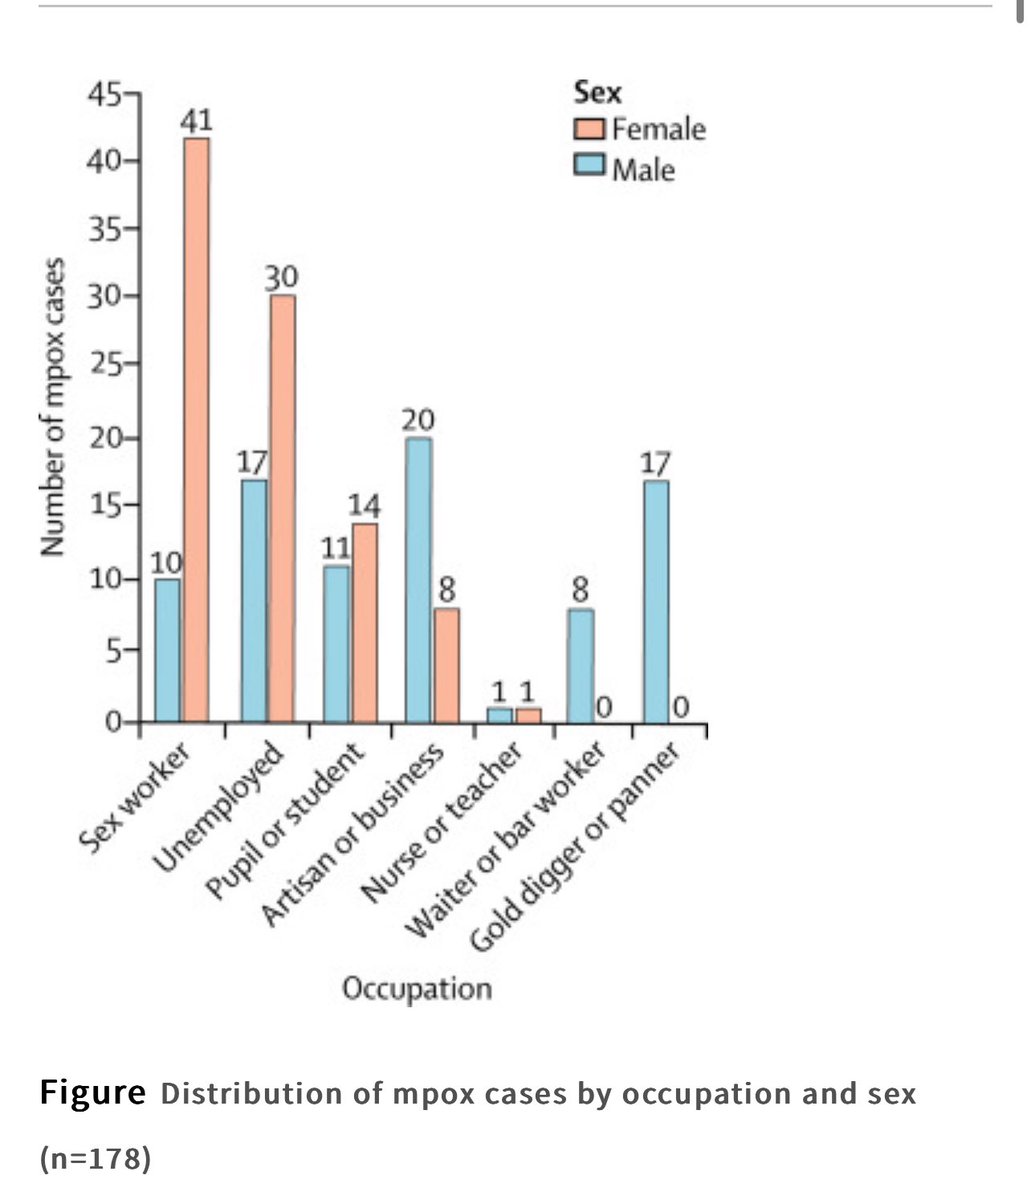 New paper on #mpox in DR Congo—> high number of cases among female sex workers “The findings from this cohort suggest increased risk of transmission associated with heterosexual (92%) and homosexual transmission (4%), with women largely affected.” thelancet.com/journals/lanin…